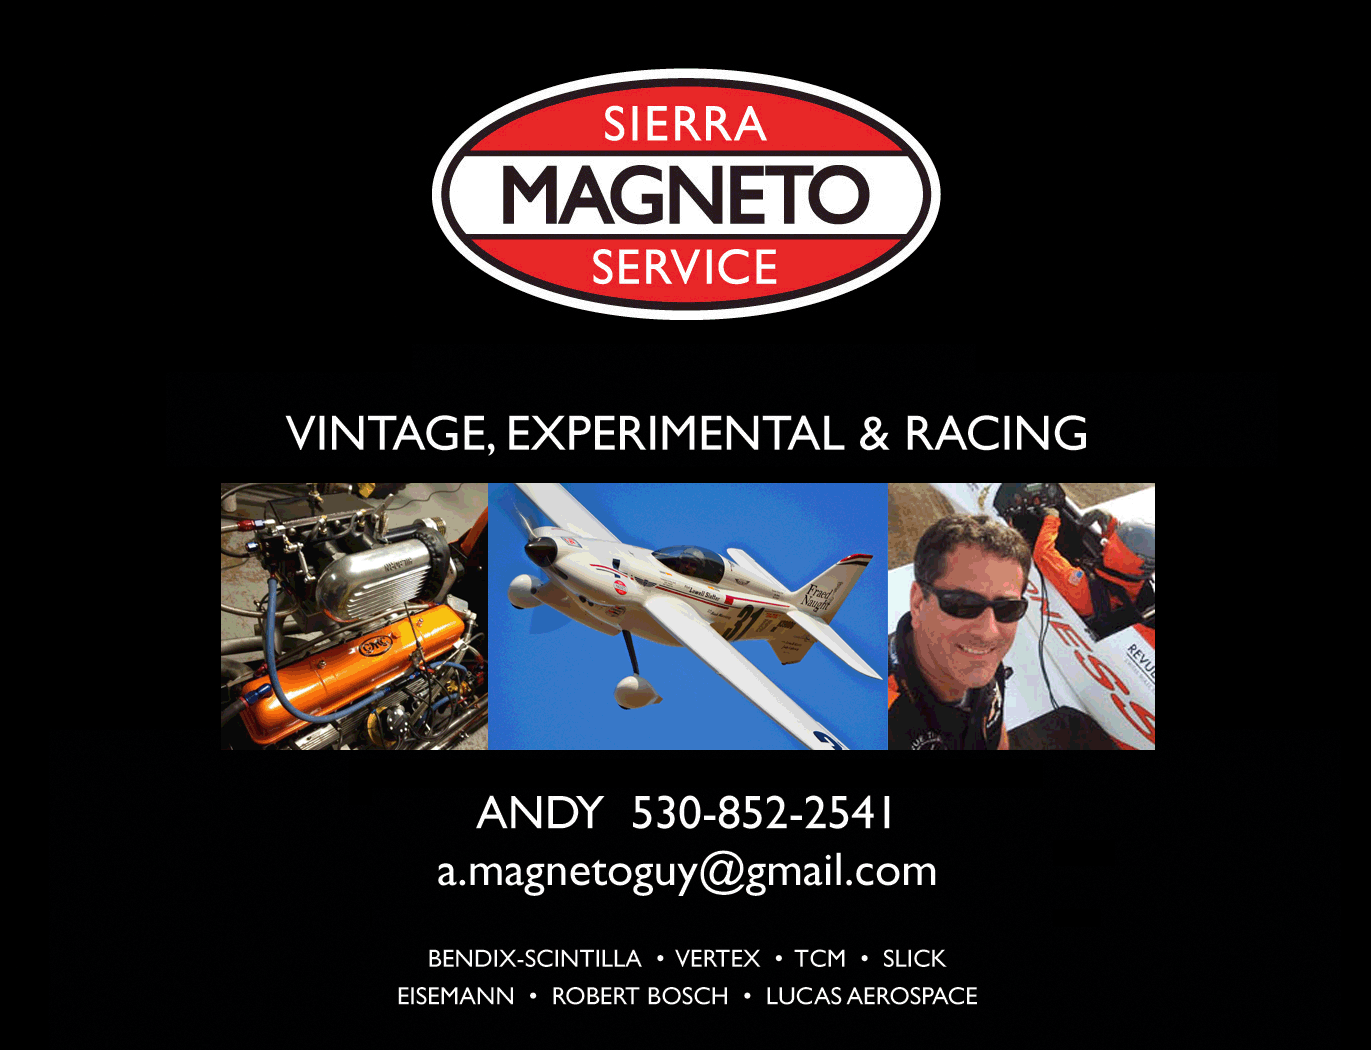 Sierra Magneto Service. Repair and restoration of vintage, experimental, and racing magnetos. Contact Andy at 530-852-2541. Or email a.magnetoguy@gmail.com. Servicing Bendix-Scintilla, Vertex, TCM, Slick, Eisemann, Robert Bosch, Lucas Aerospace, and more.